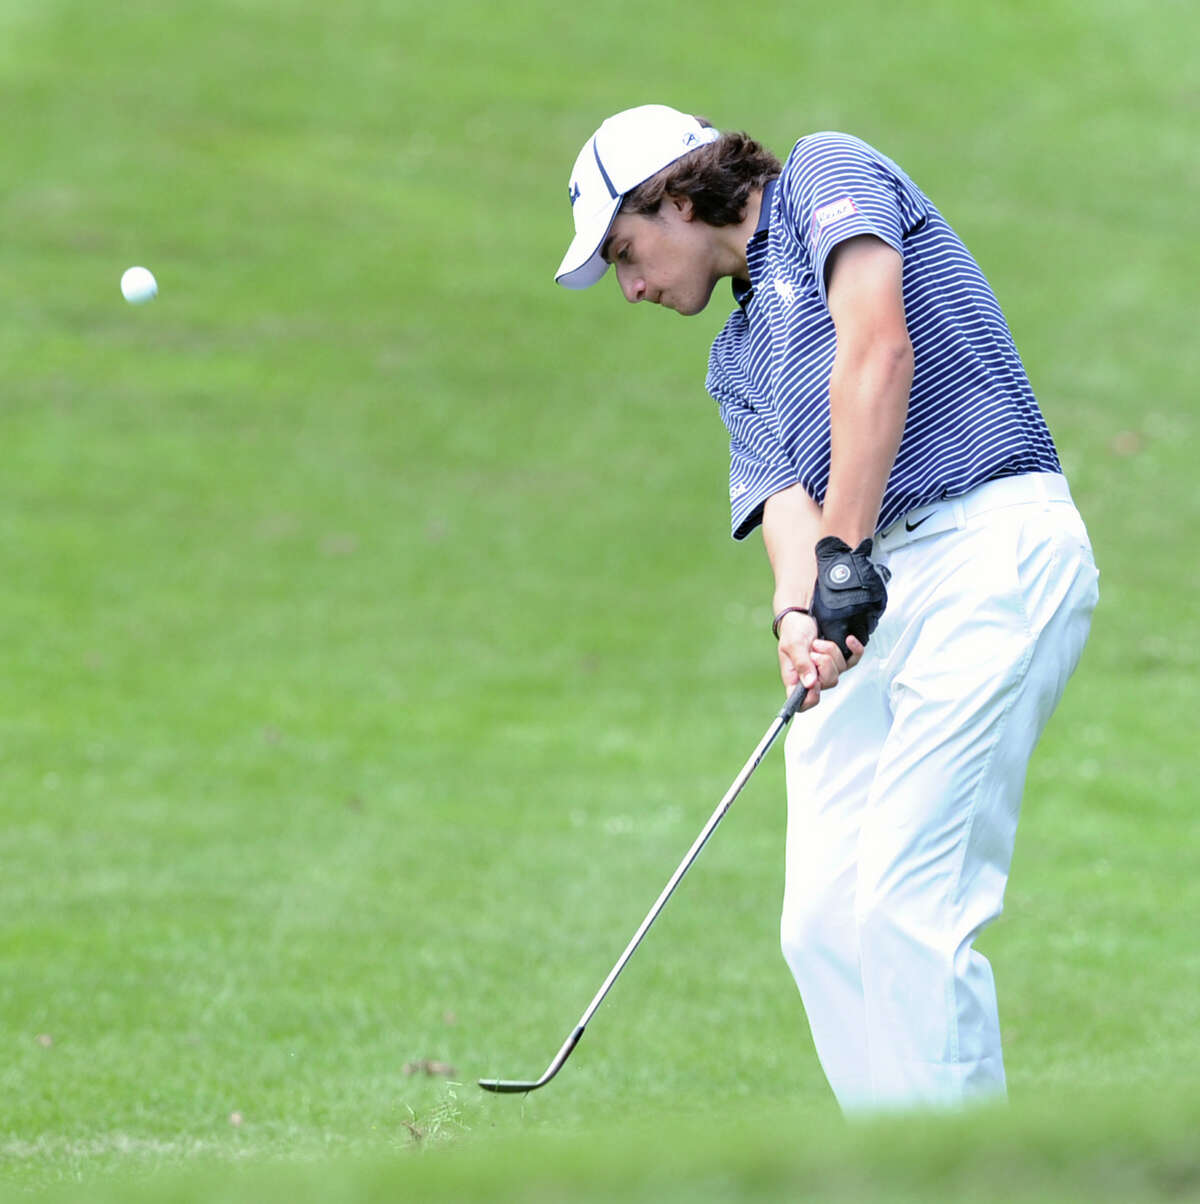 Paul Pastore hits from the second fairway during the Greenwich Town-wide Golf championship at the Griffith E. Harris Memorial Golf Course in Greenwich, Saturday afternoon, June 29, 2013.